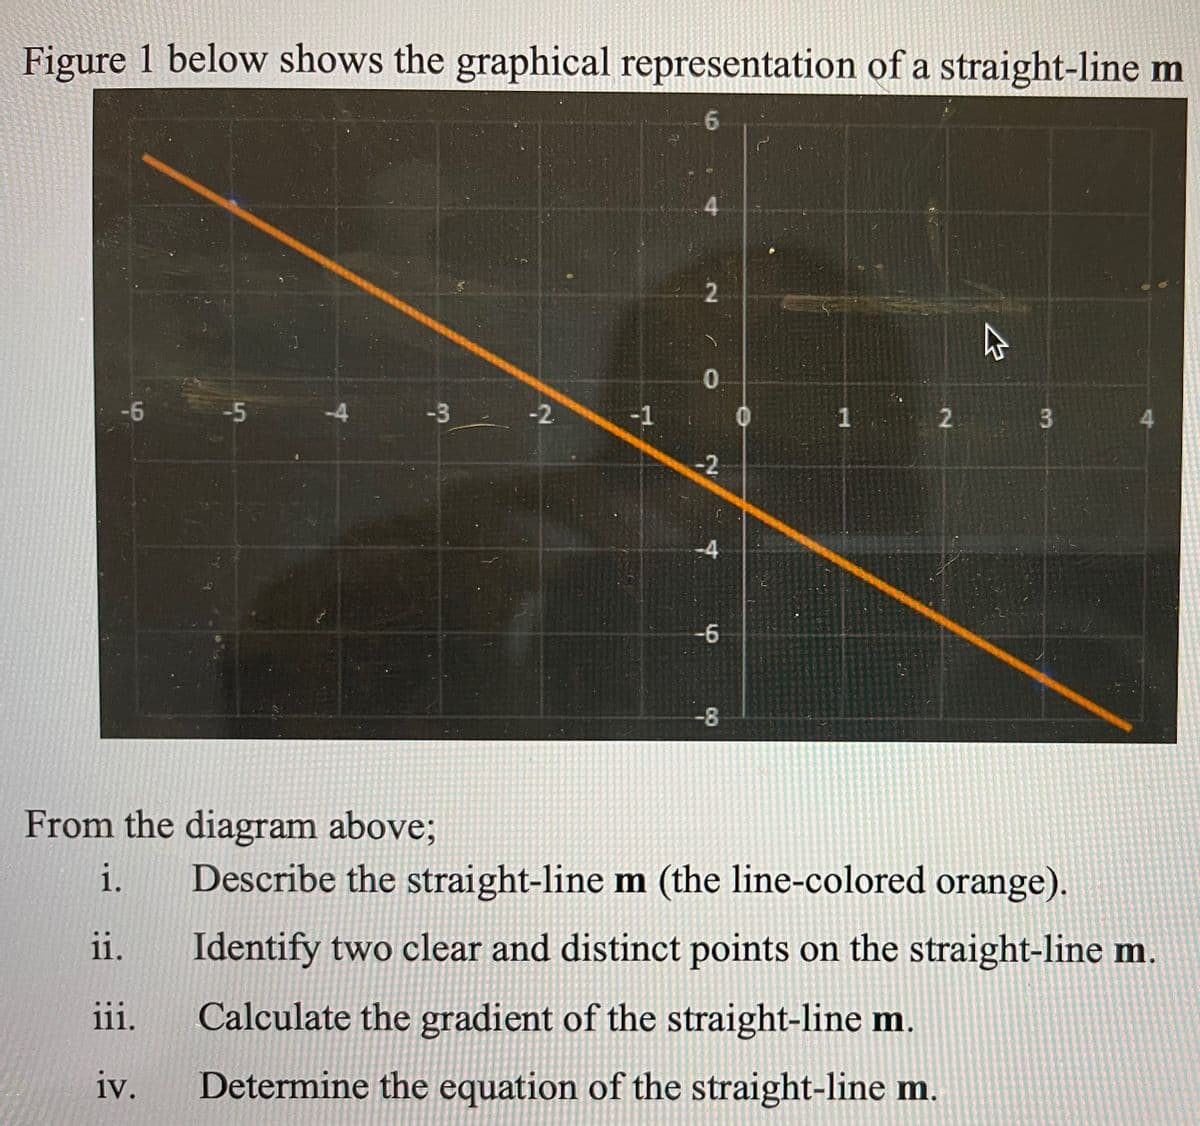 Figure 1 below shows the graphical representation of a straight-line m
6
-6
-5
iv.
-4
-3 -2
From the diagram above;
i.
ii.
iii.
-1
4
2
0
-2
-4
-6
-8
0
A
1 2 3
4
Describe the straight-line m (the line-colored orange).
Identify two clear and distinct points on the straight-line m.
Calculate the gradient of the straight-line m.
Determine the equation of the straight-line m.